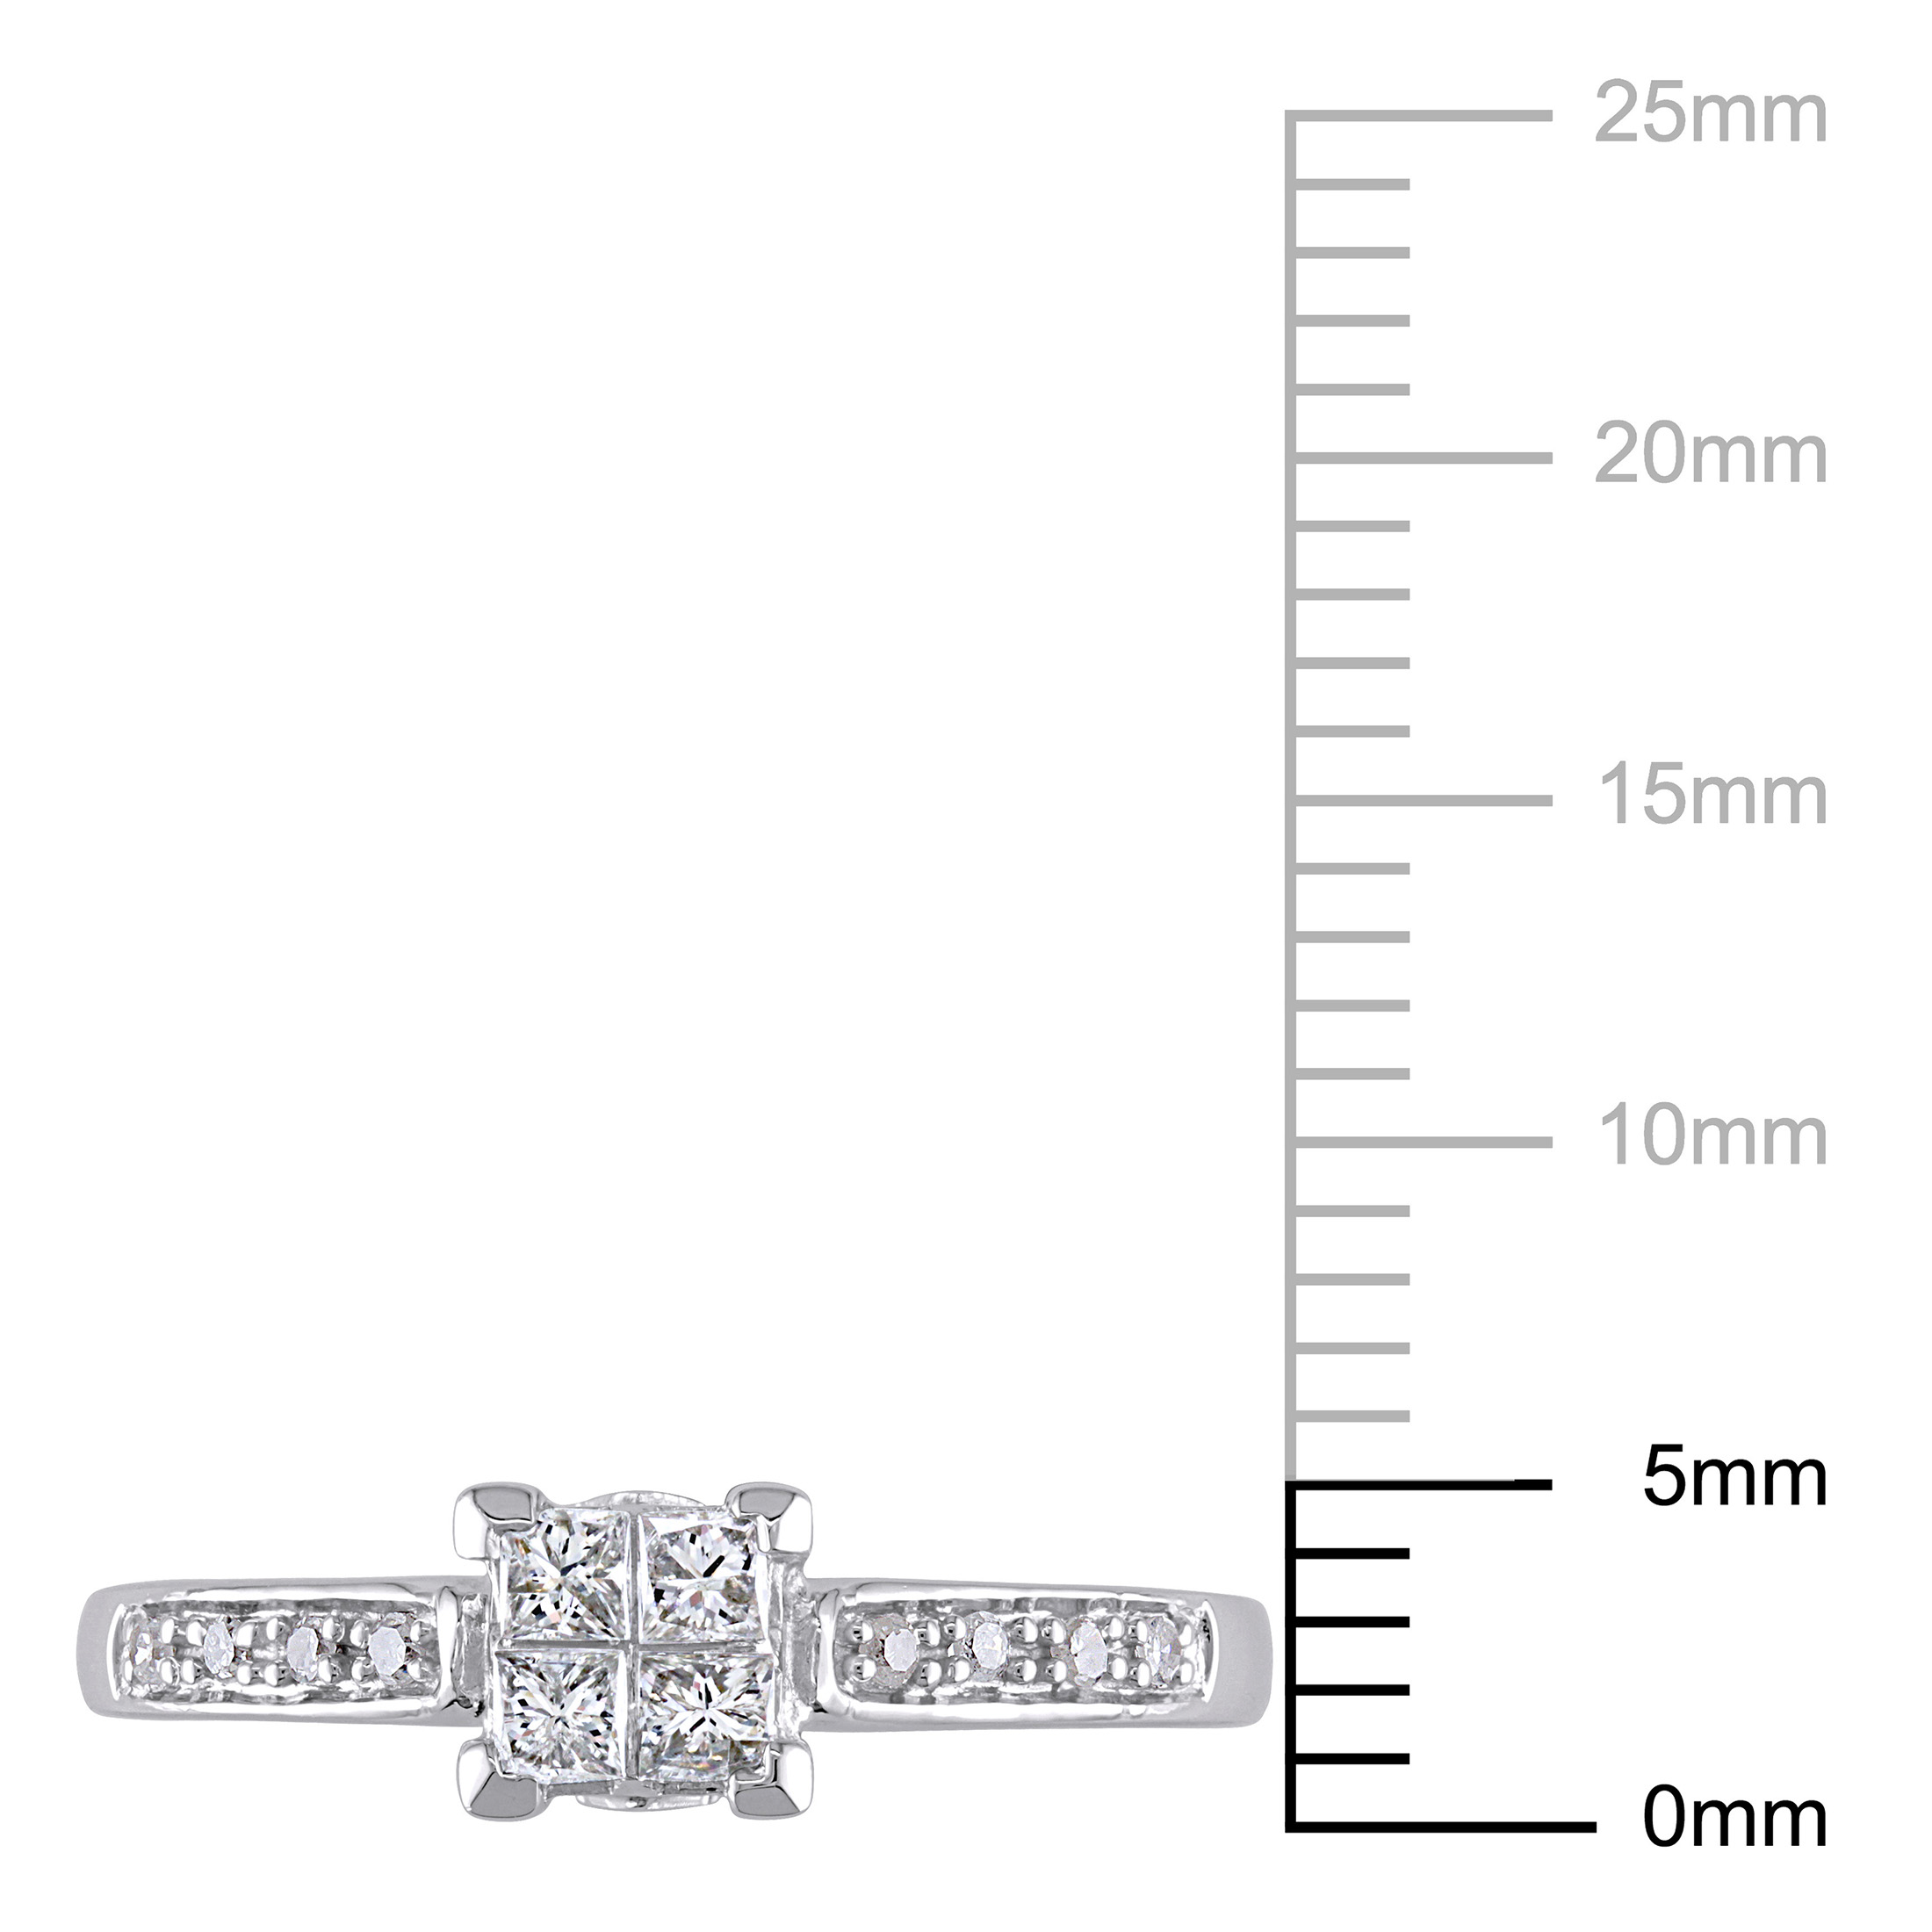 Everly Women's 1/4 Carat TDW Princess and Round-Cut Diamond 10kt White Gold Solitaire Style Bridal Engagement Ring with Invisible Quad Setting and Pave setting on Band (G-H, I2-I3) - image 3 of 9